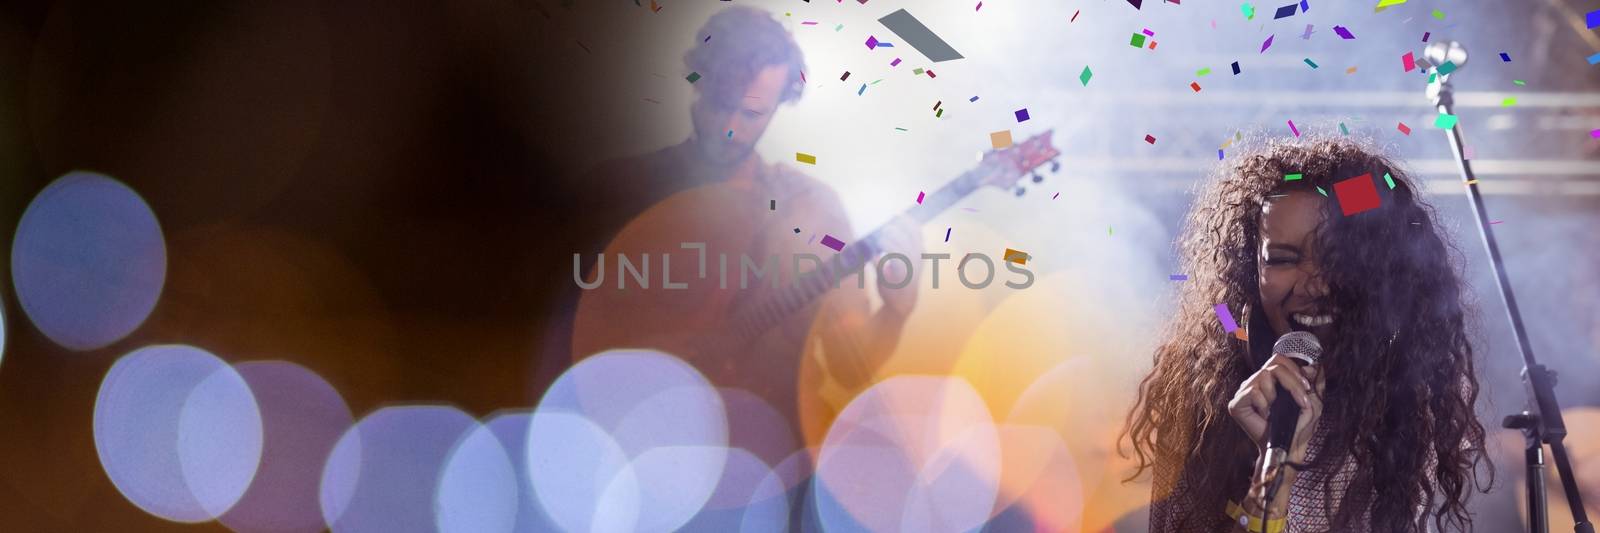 Digital composite of people playing at concert with transition